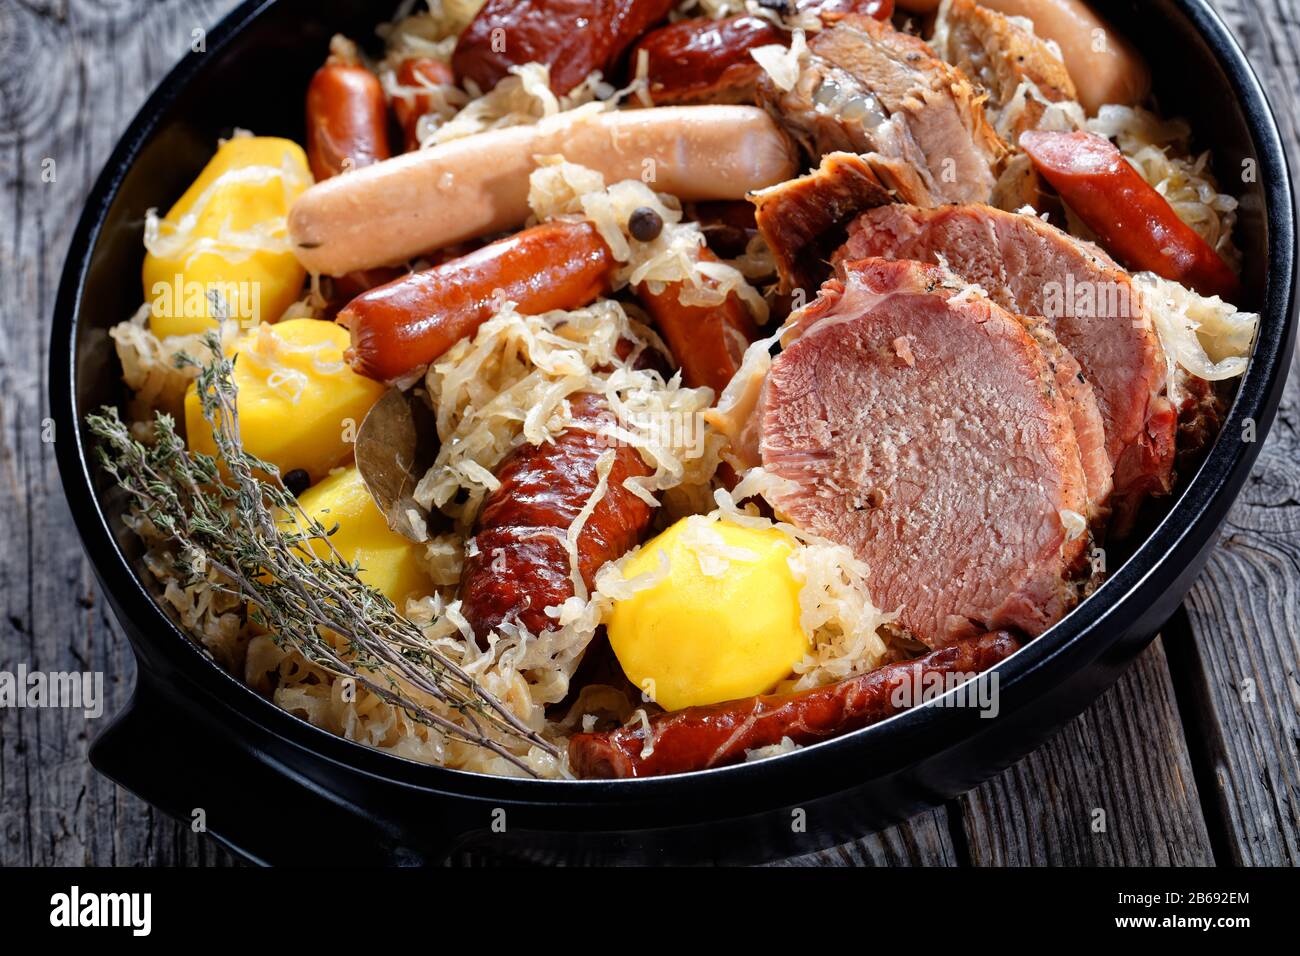 The Alsace sauerkraut, named choucroute in french a fermented cabbage stew with pork loin, bacon, and sausages: bratwurst, knockwurst cooked with pota Stock Photo